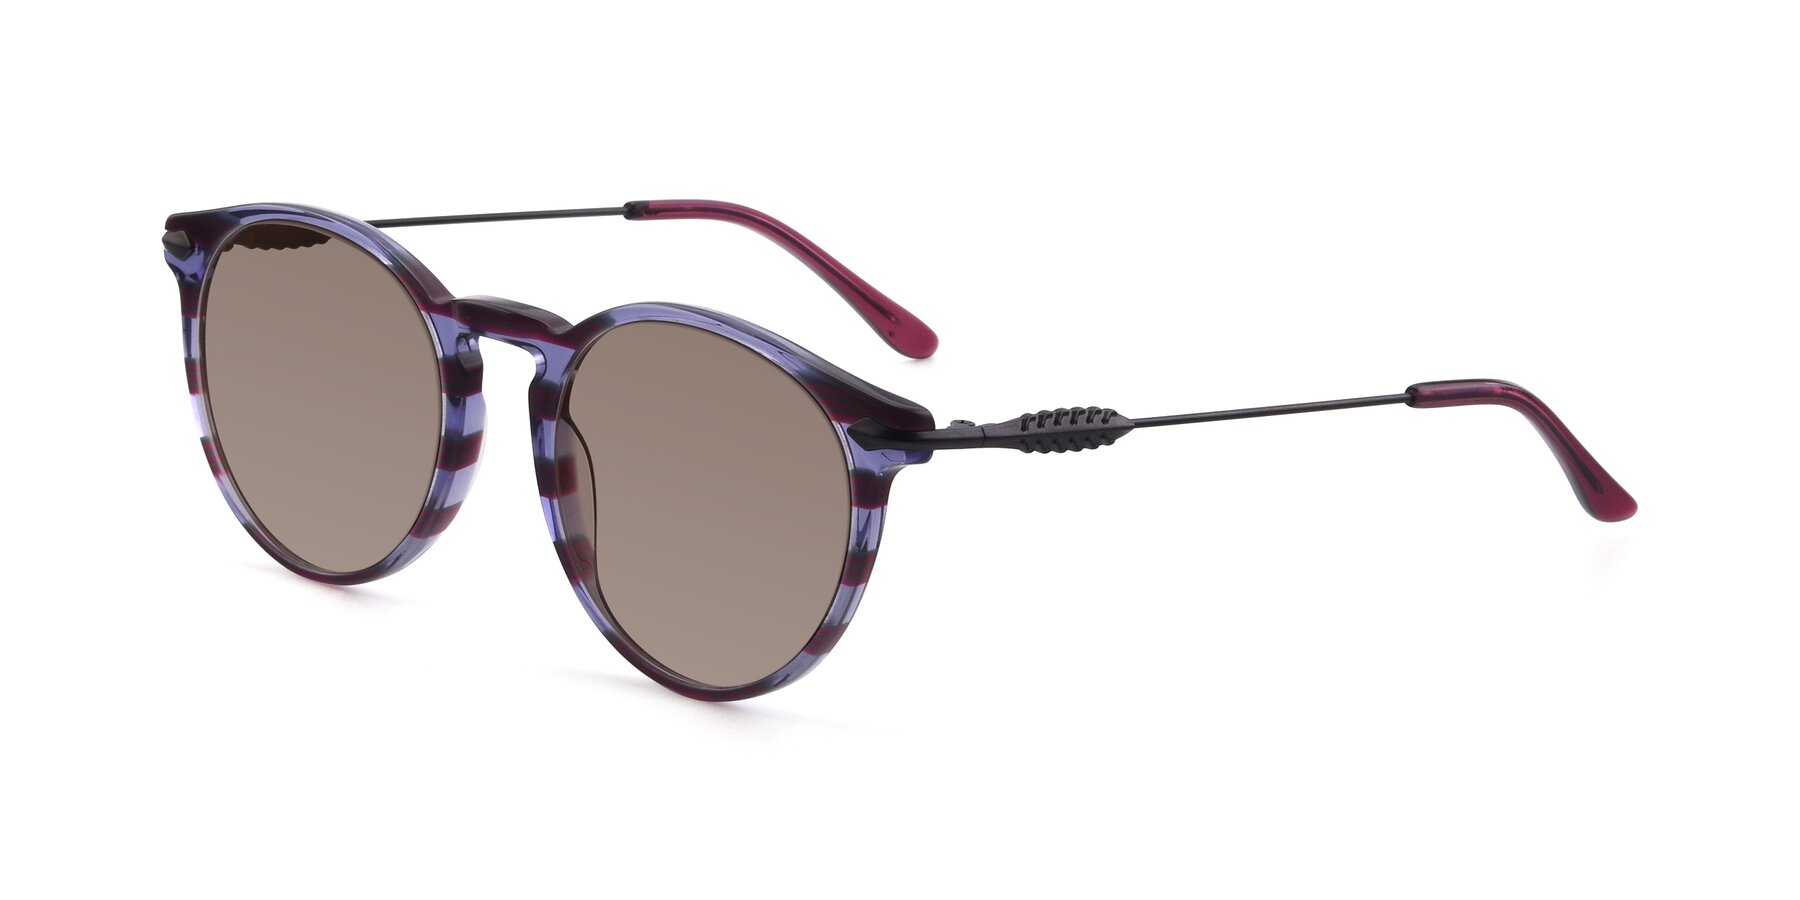 Angle of 17660 in Stripe Purple with Medium Brown Tinted Lenses